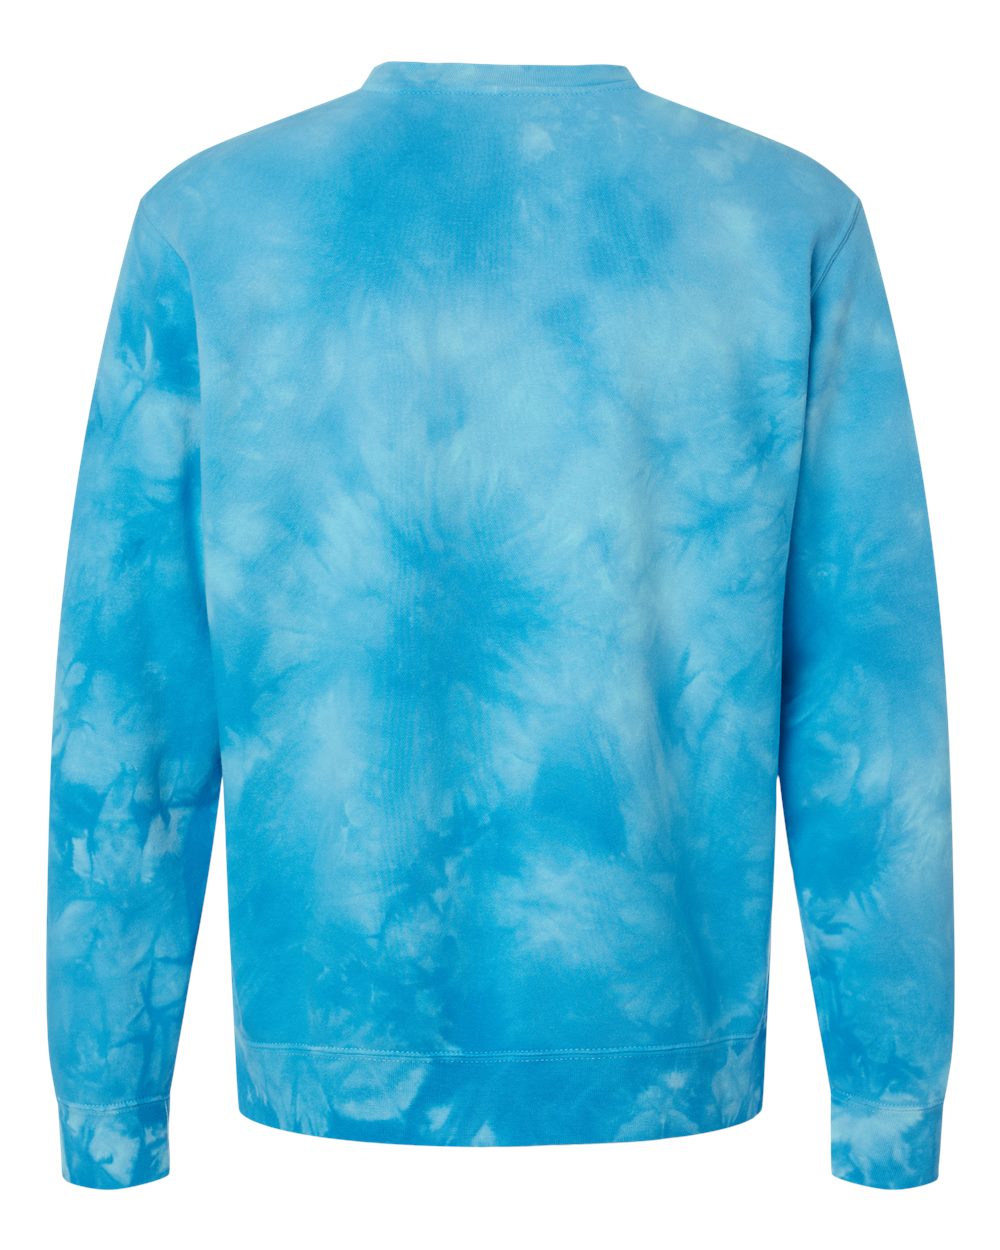 Independent Trading Co. PRM3500TD - Midweight Tie-Dyed Crewneck